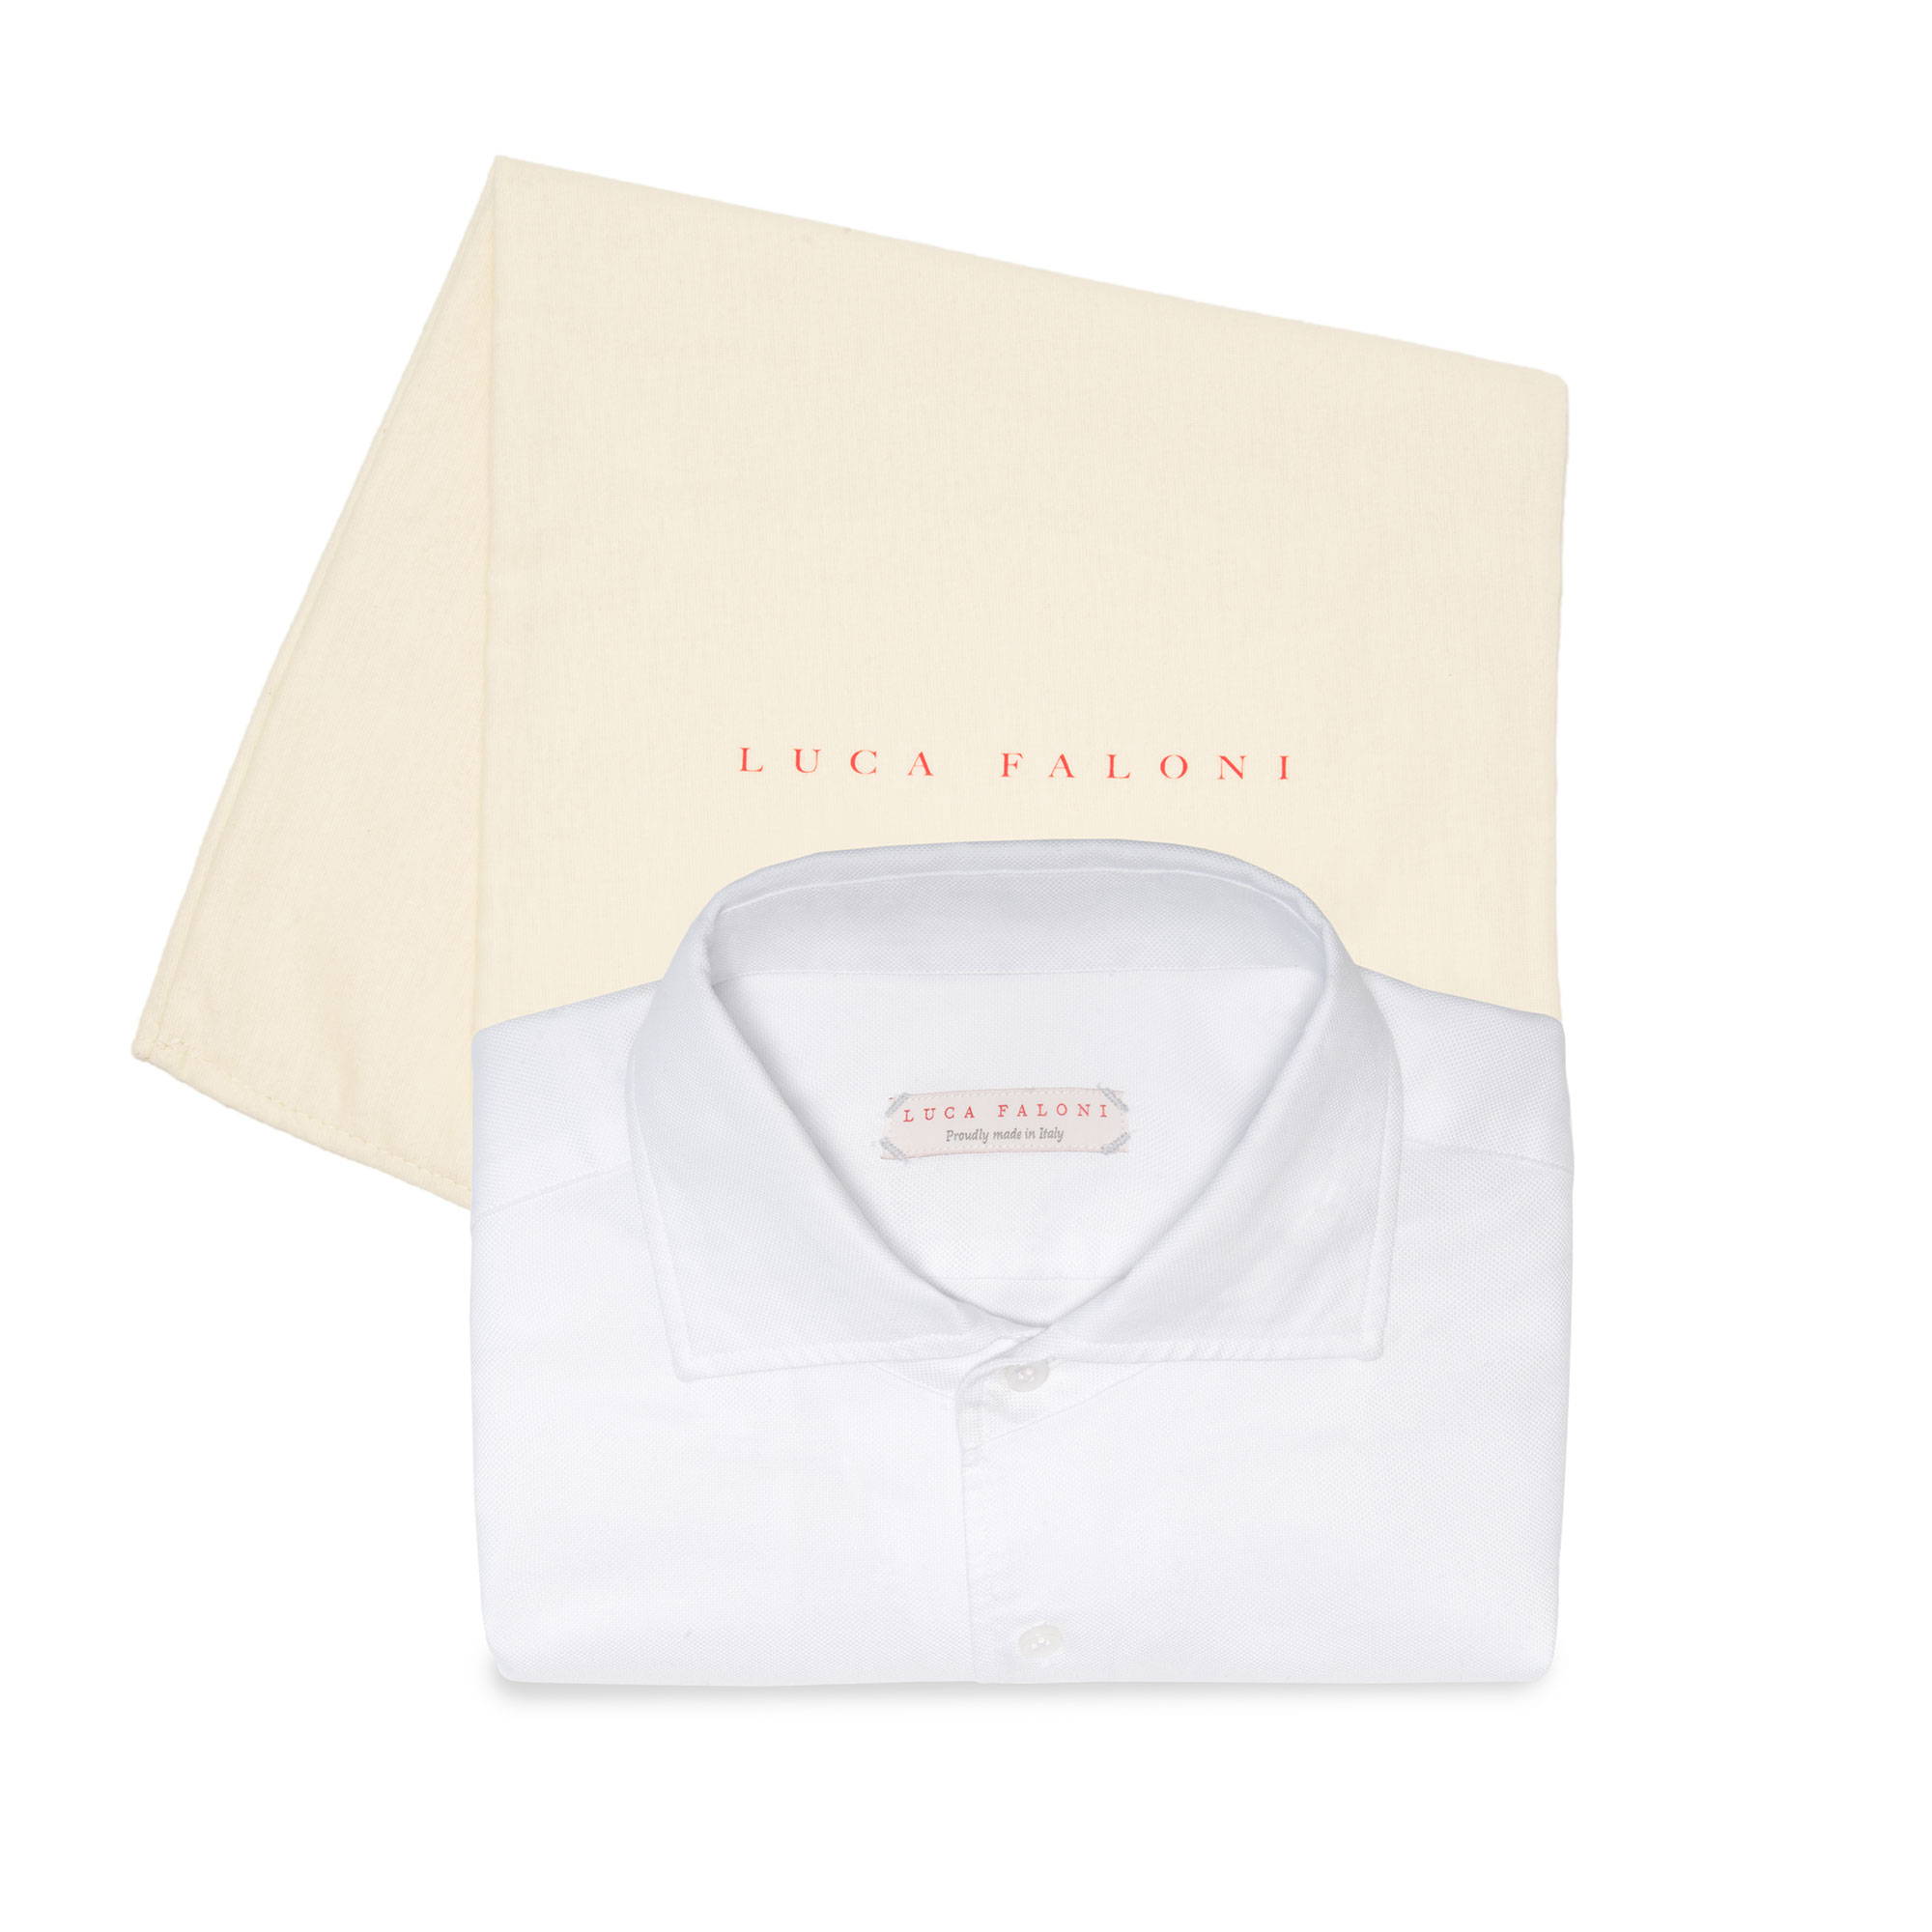 Luca Faloni Classic White Oxford Cotton Shirt Made in Italy